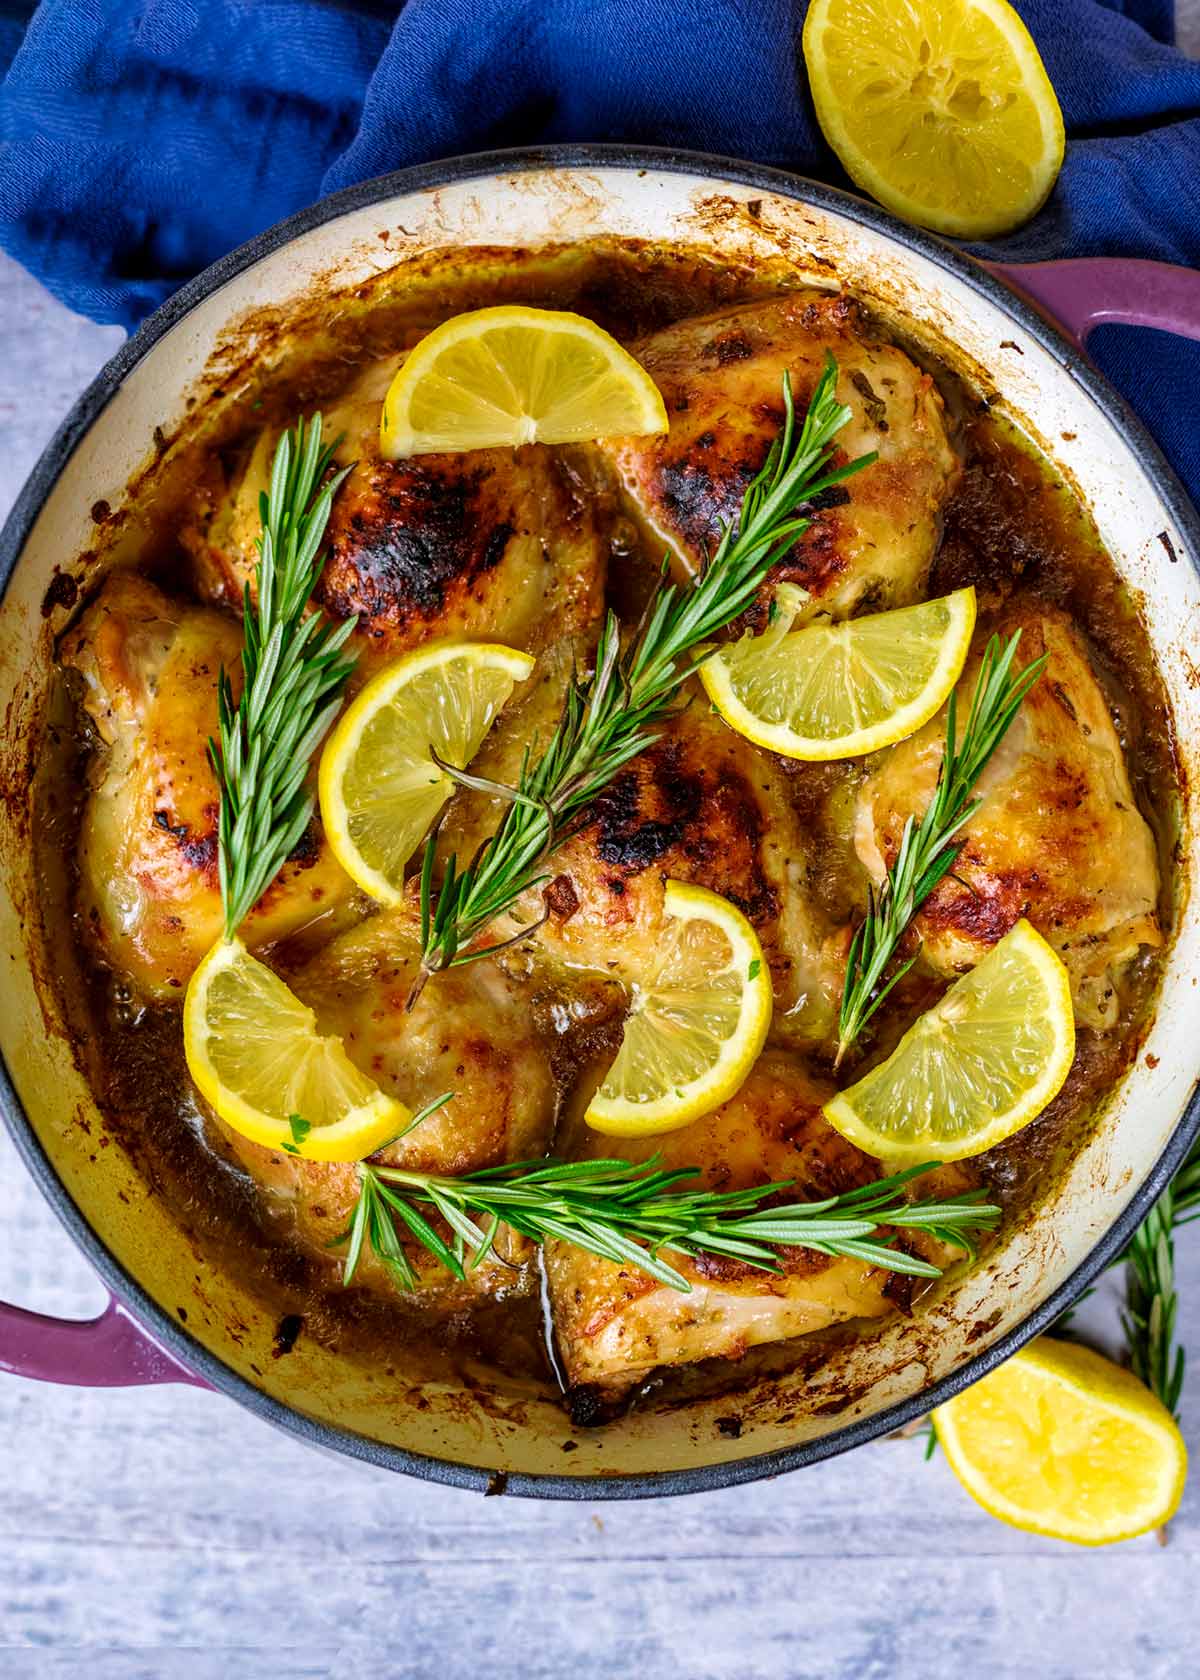 A large cooking pan containing cooked chicken thighs, lemon slices and rosemary sprigs.